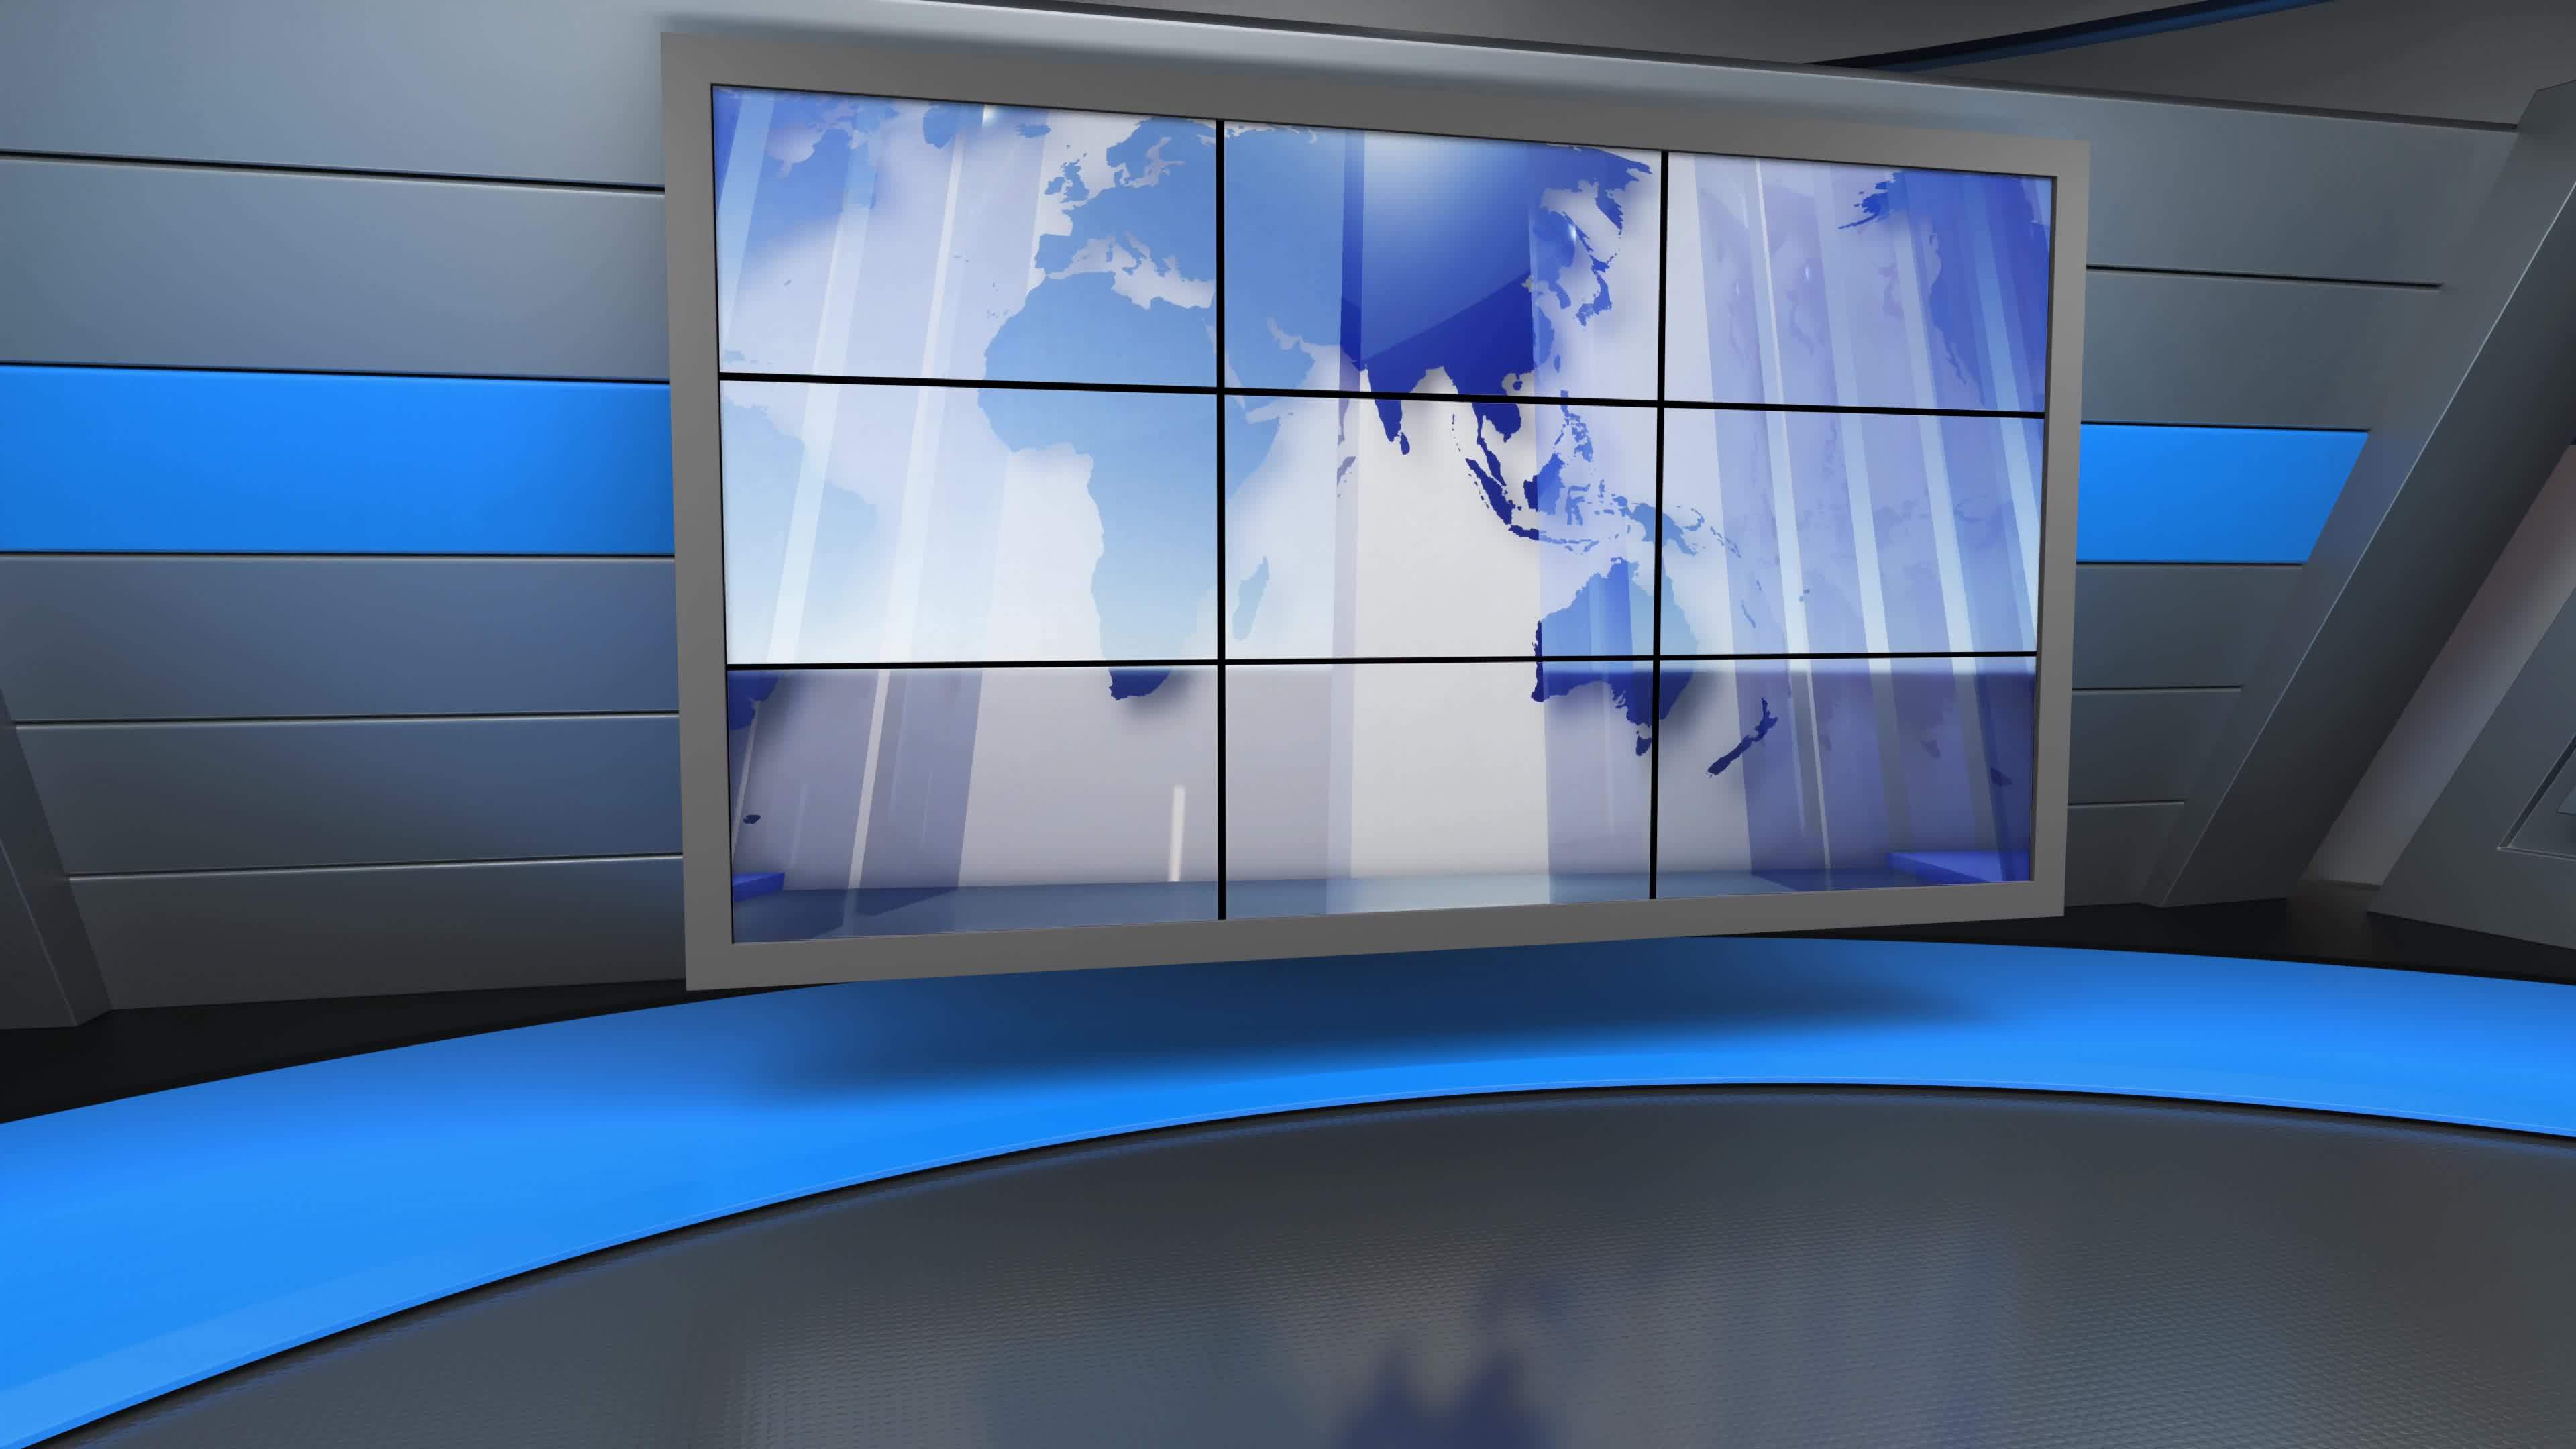 News Studio Background Stock Video Footage for Free Download